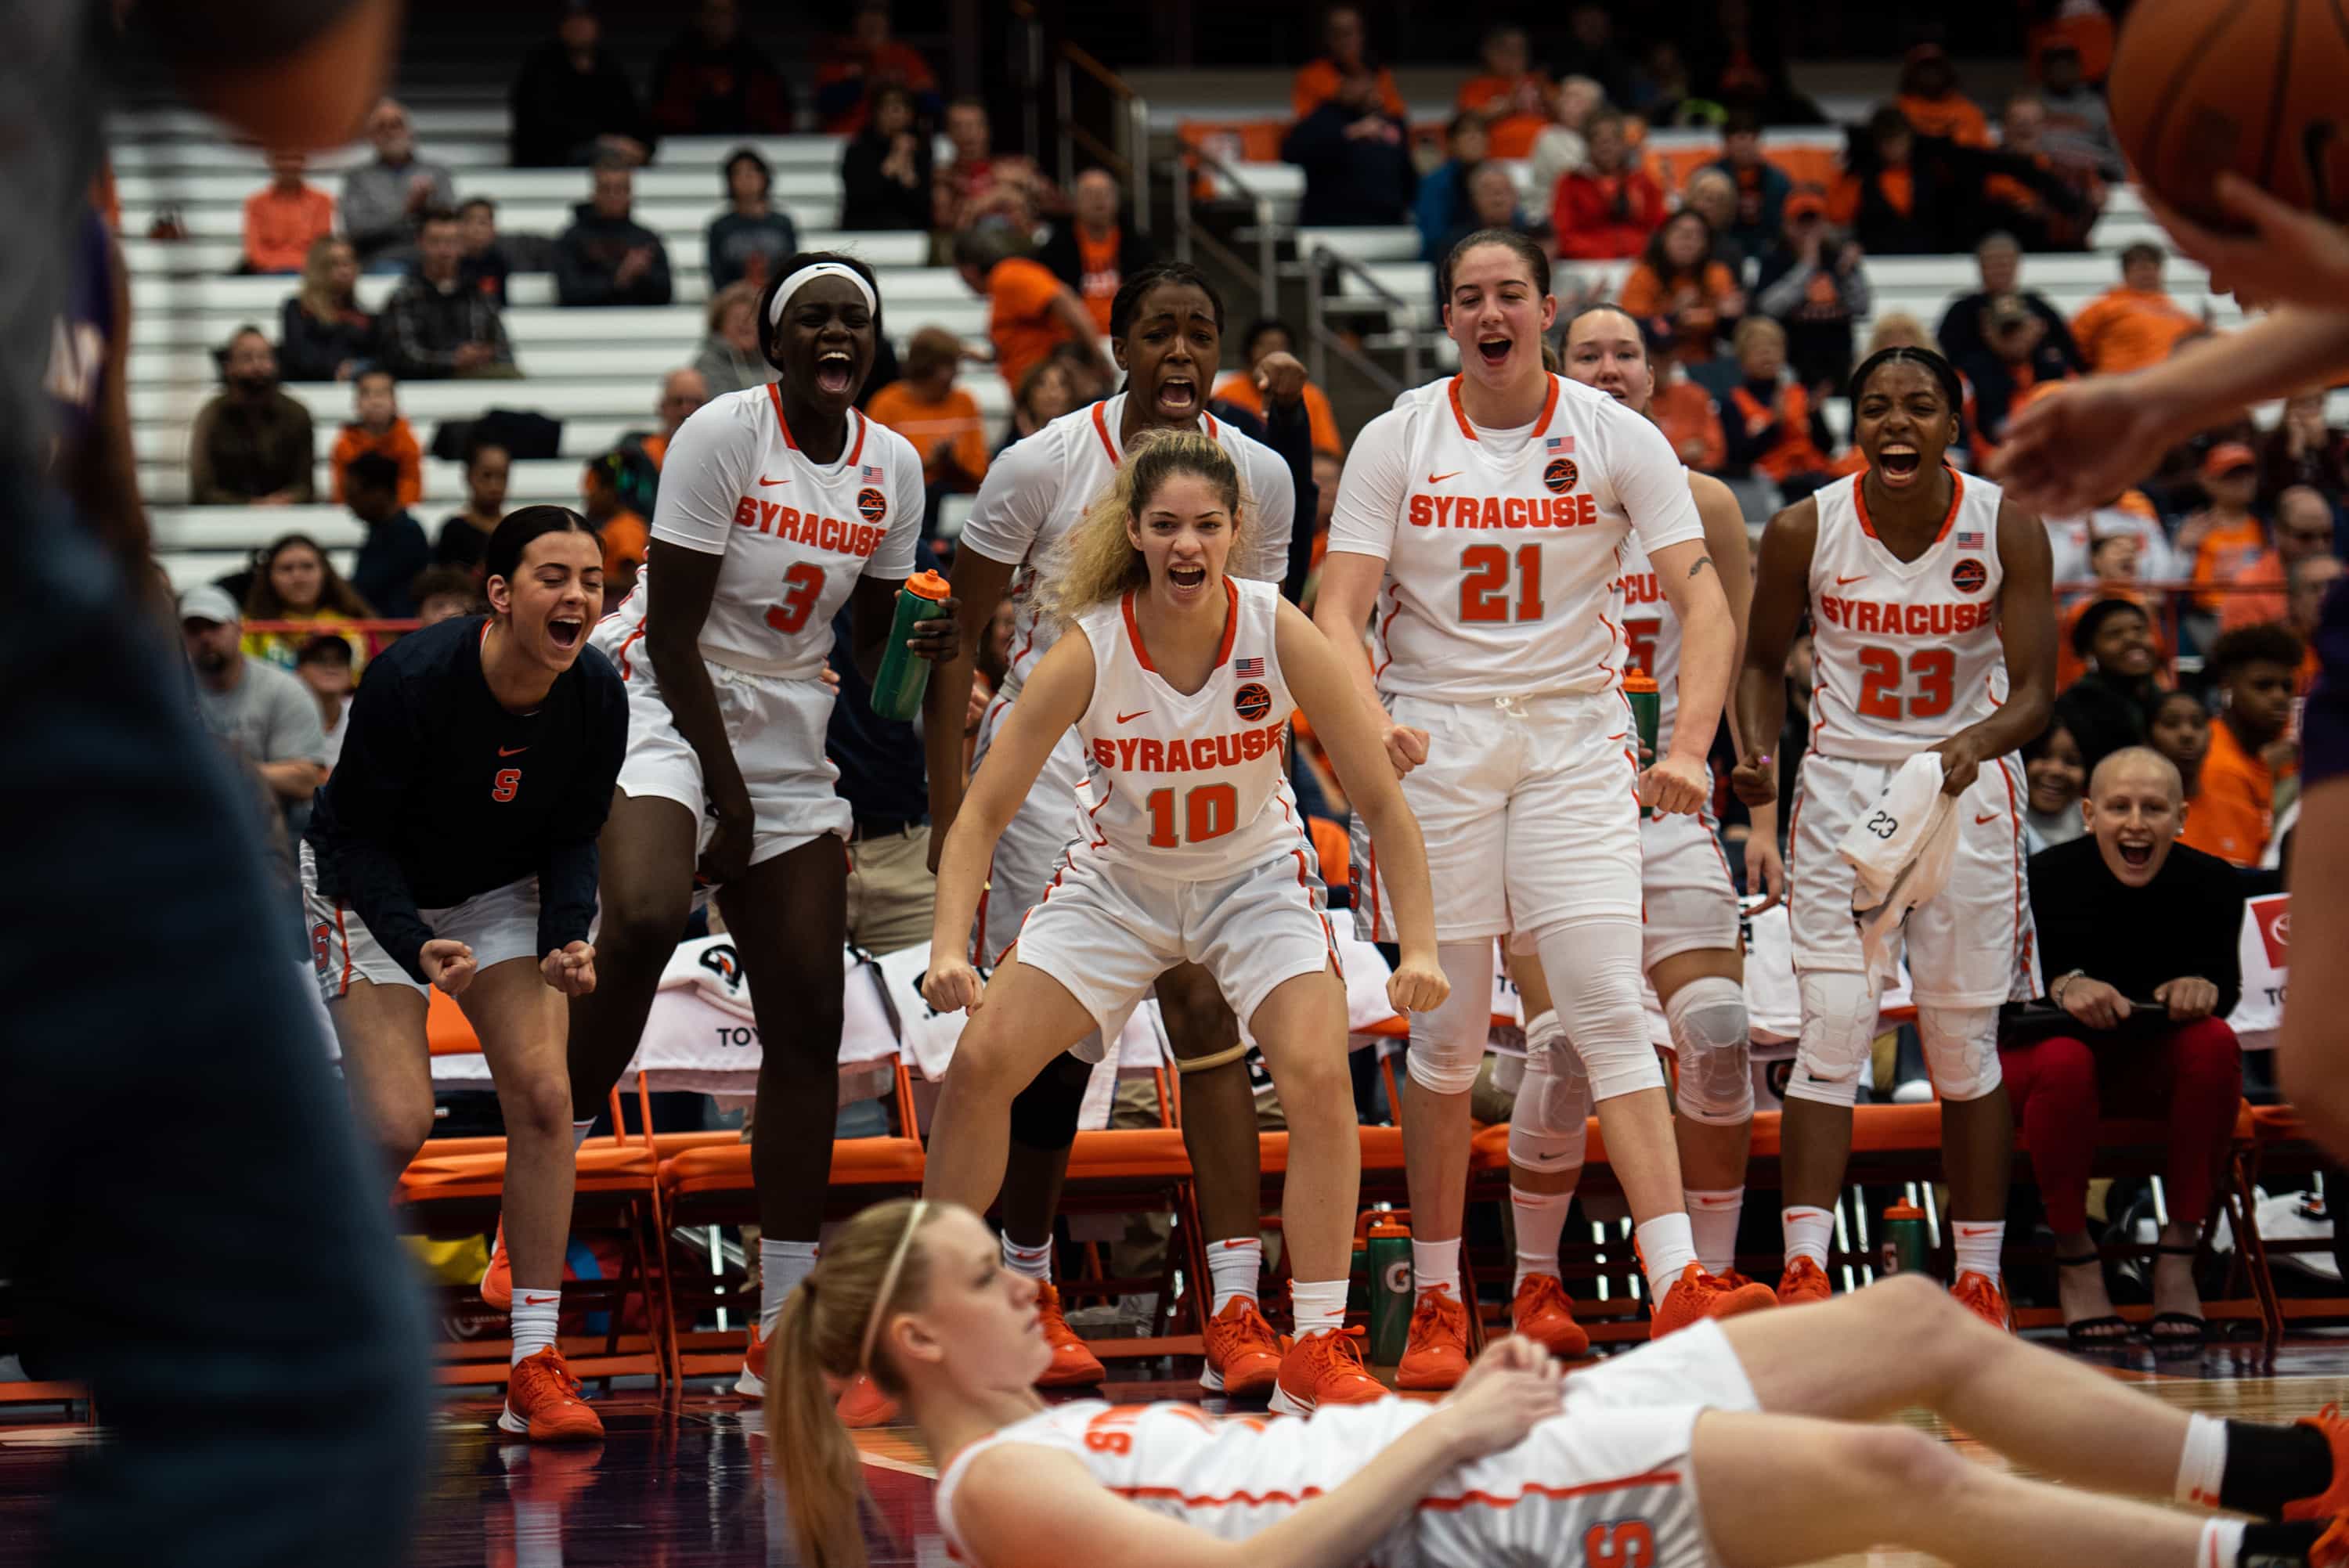 Syracuse cheers after Brooke Alexander scores a layup and draws a foul. Alexander hit her free-throw, making it a three-point play.